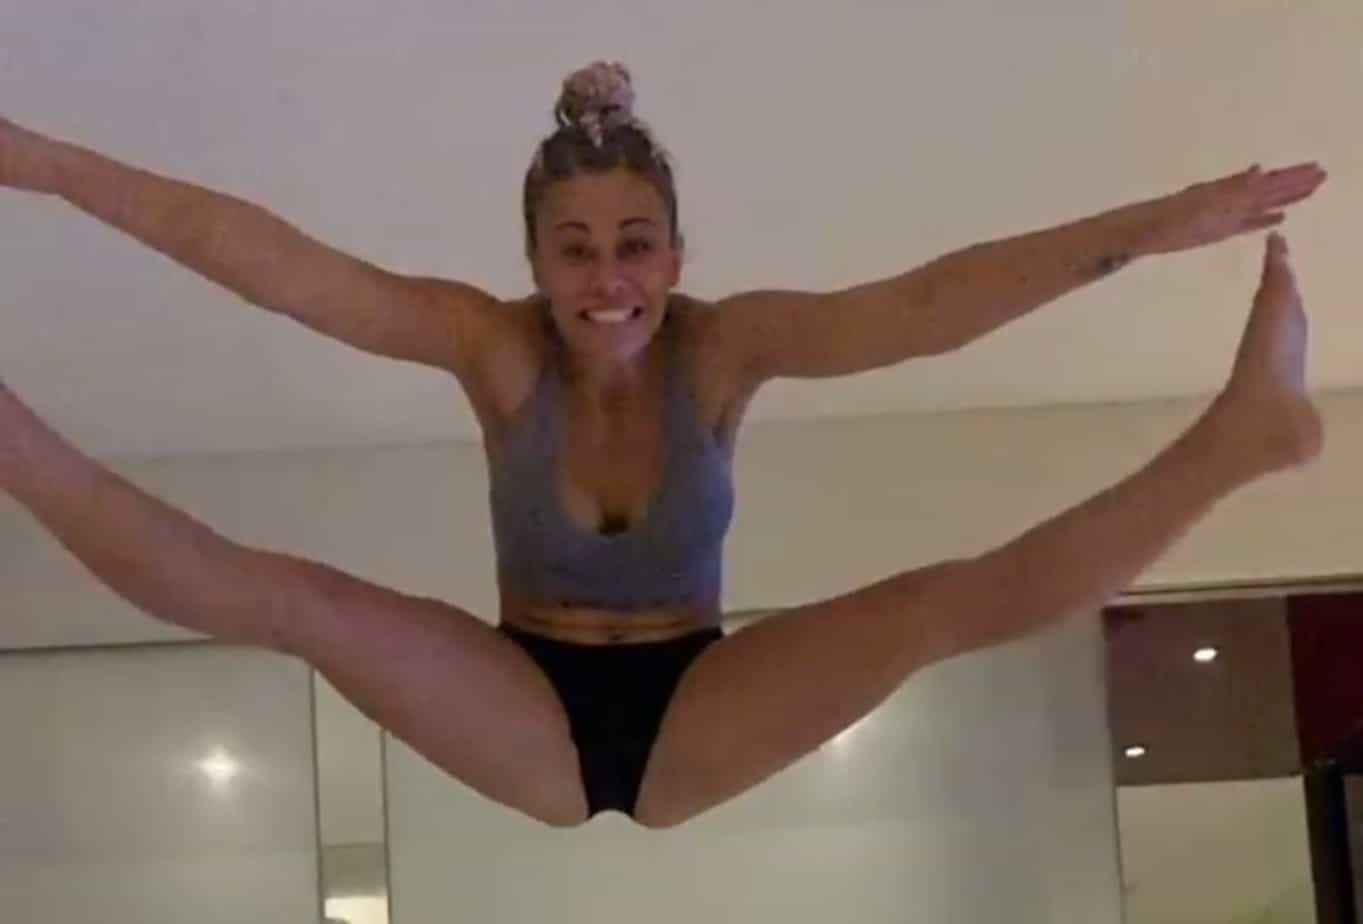 The UFC 251 schedule of Paige VanZant could be the nut low, but you wouldn't know it by watching her always-happy Instagram videos.